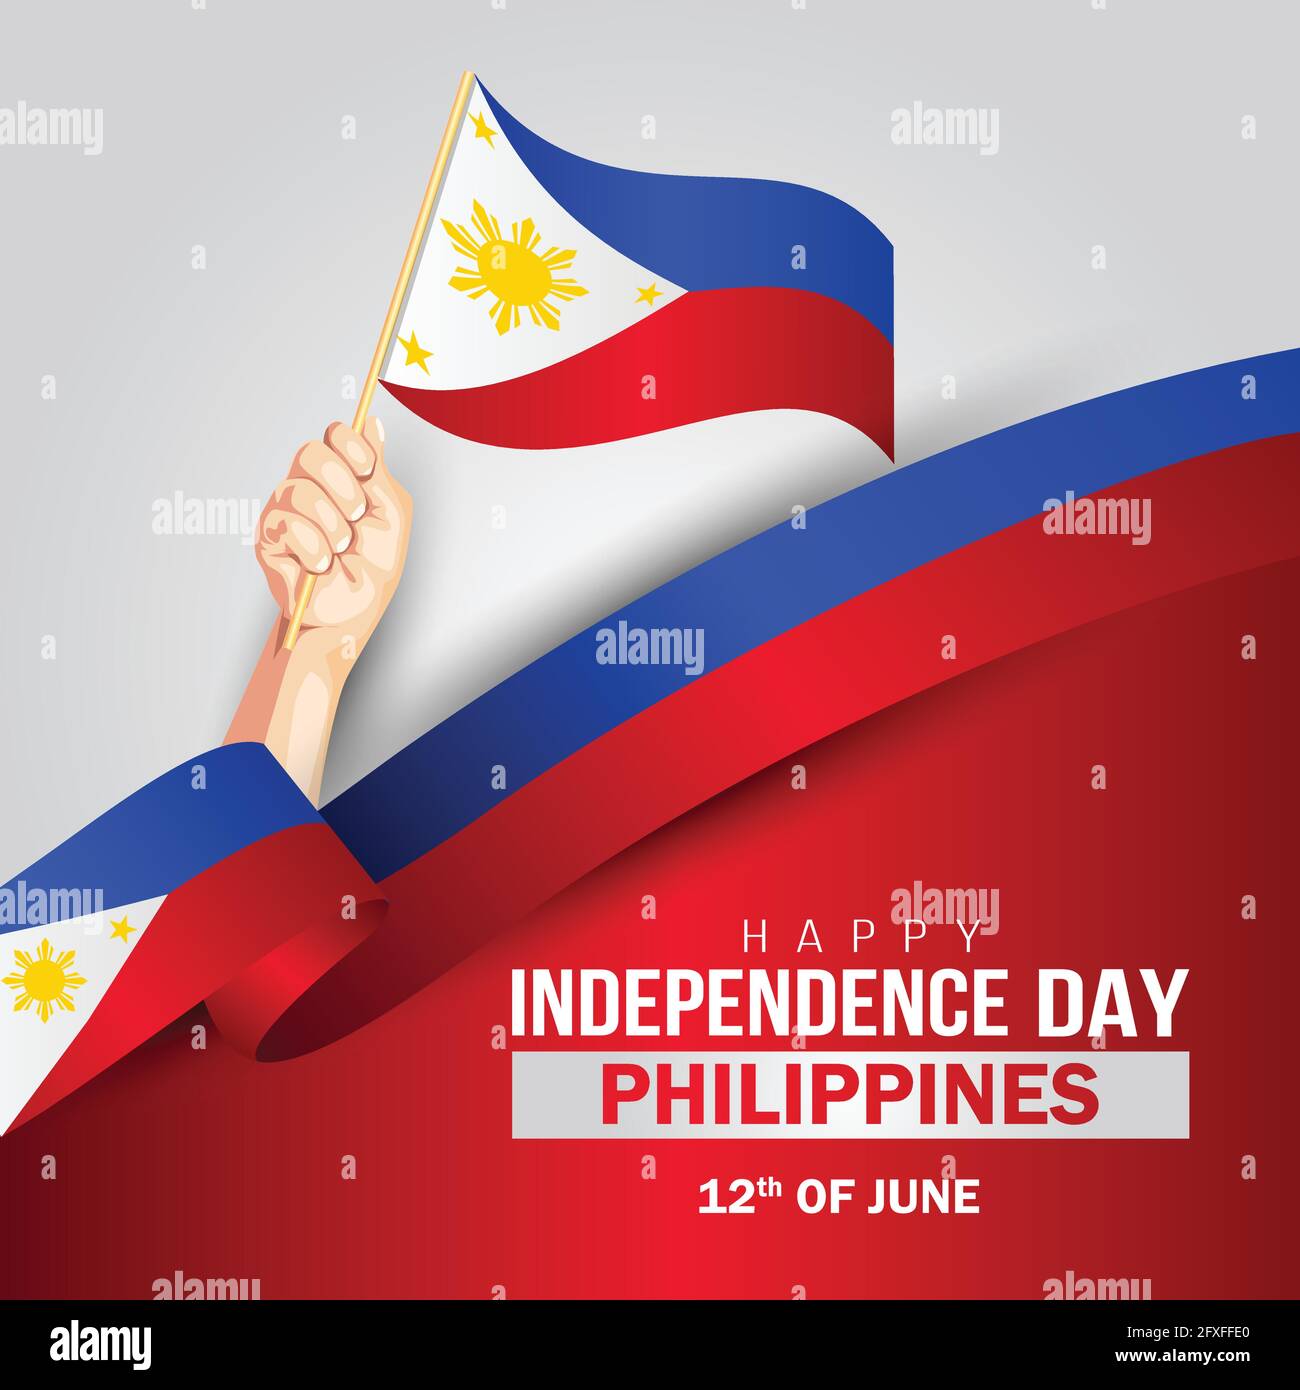 Happy Independence Day Philippines Hands Holding With Philippine Flag Vector Illustration Design Stock Vector Image Art Alamy